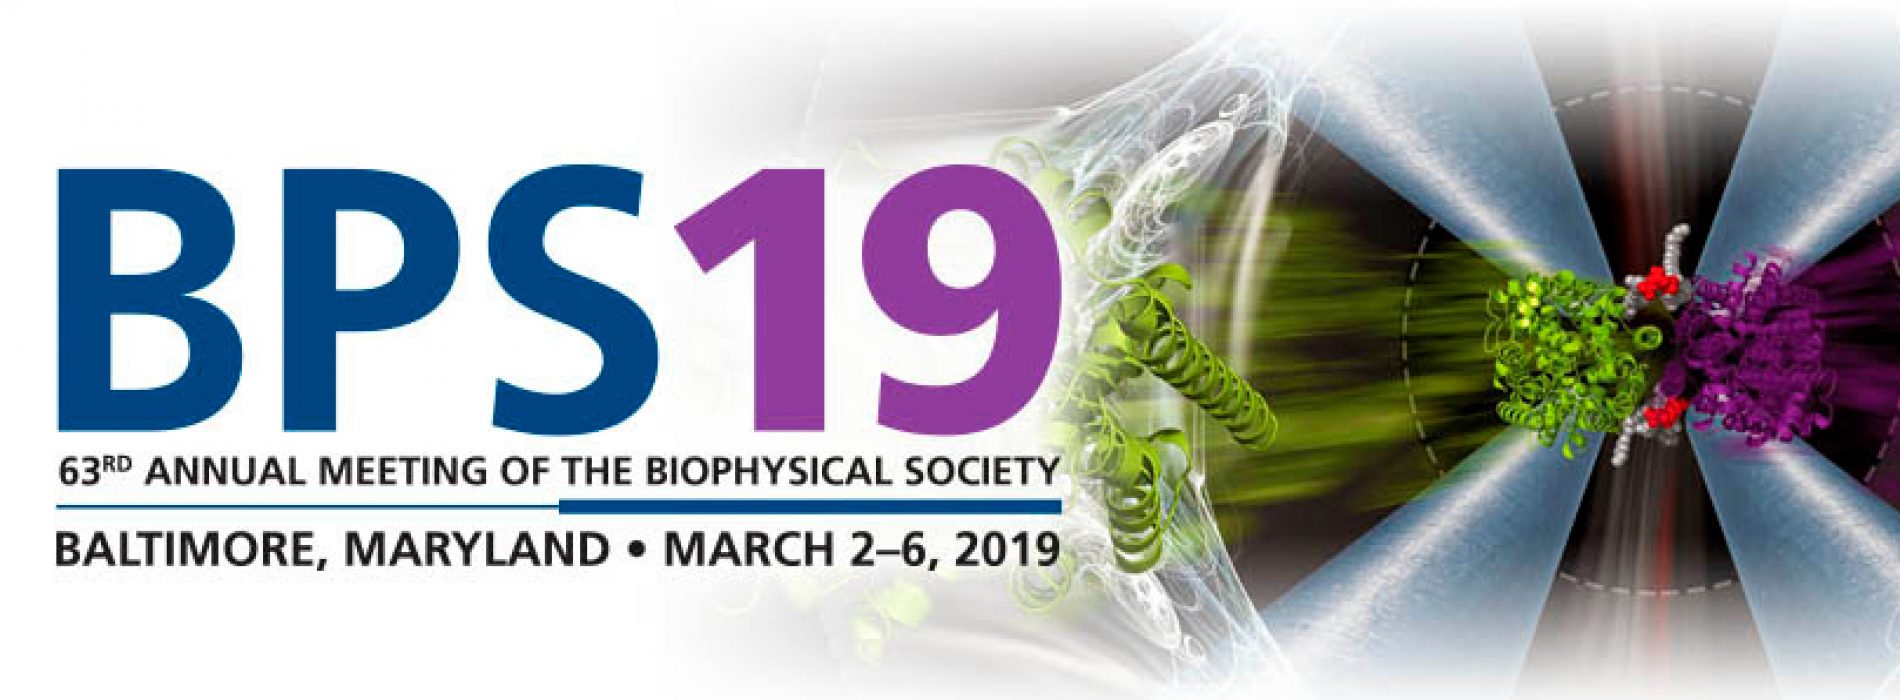 Save the Date Biophysical Society 63rd Annual Meeting Baltimore